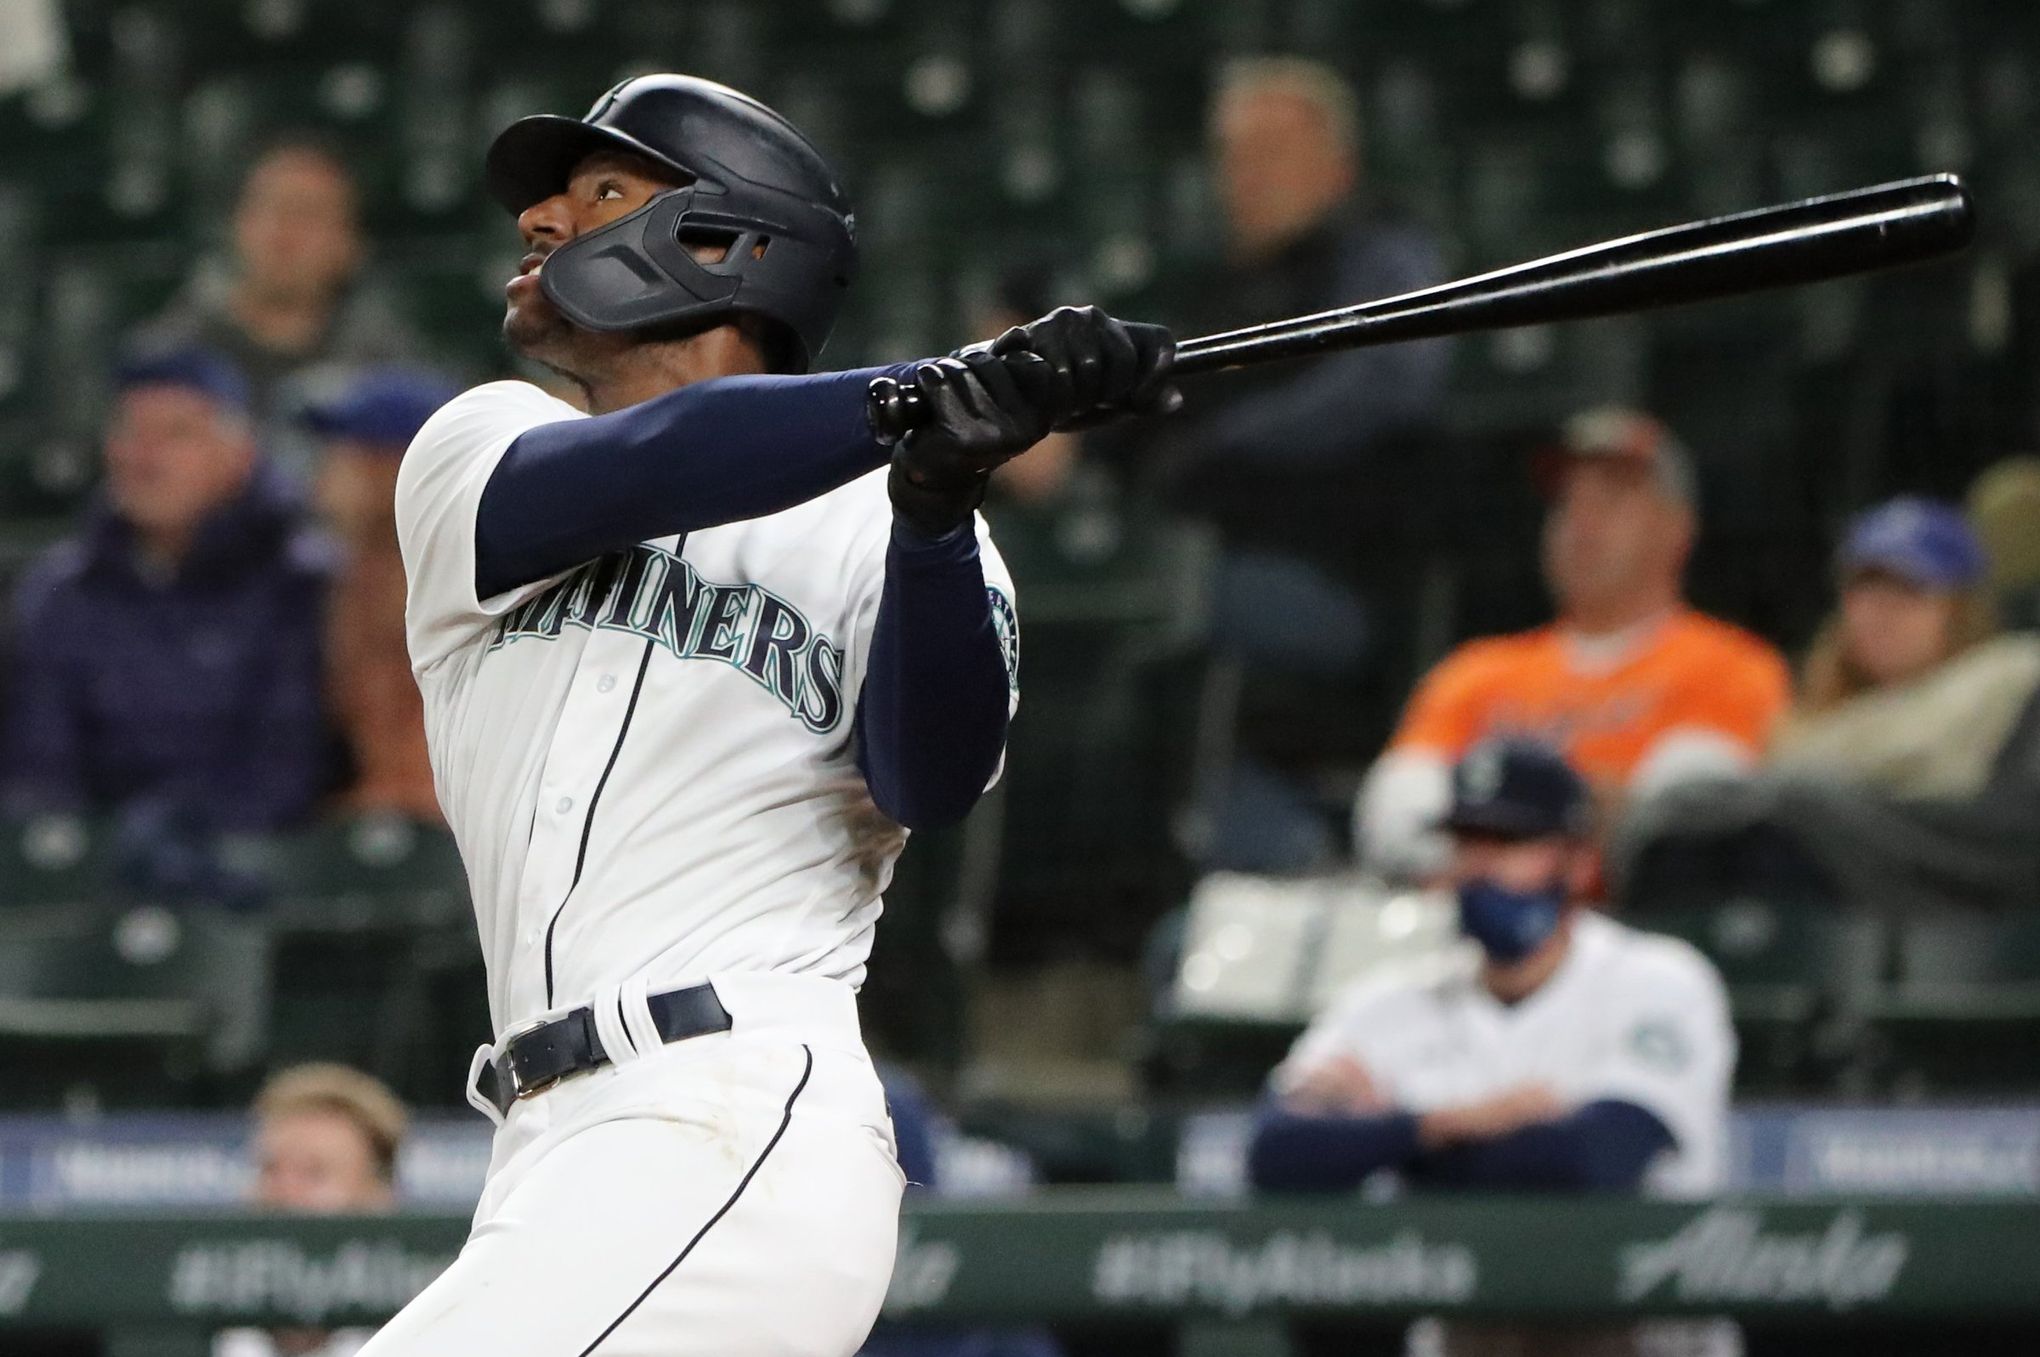 Kyle Lewis returns to Mariners after lengthy injury recovery